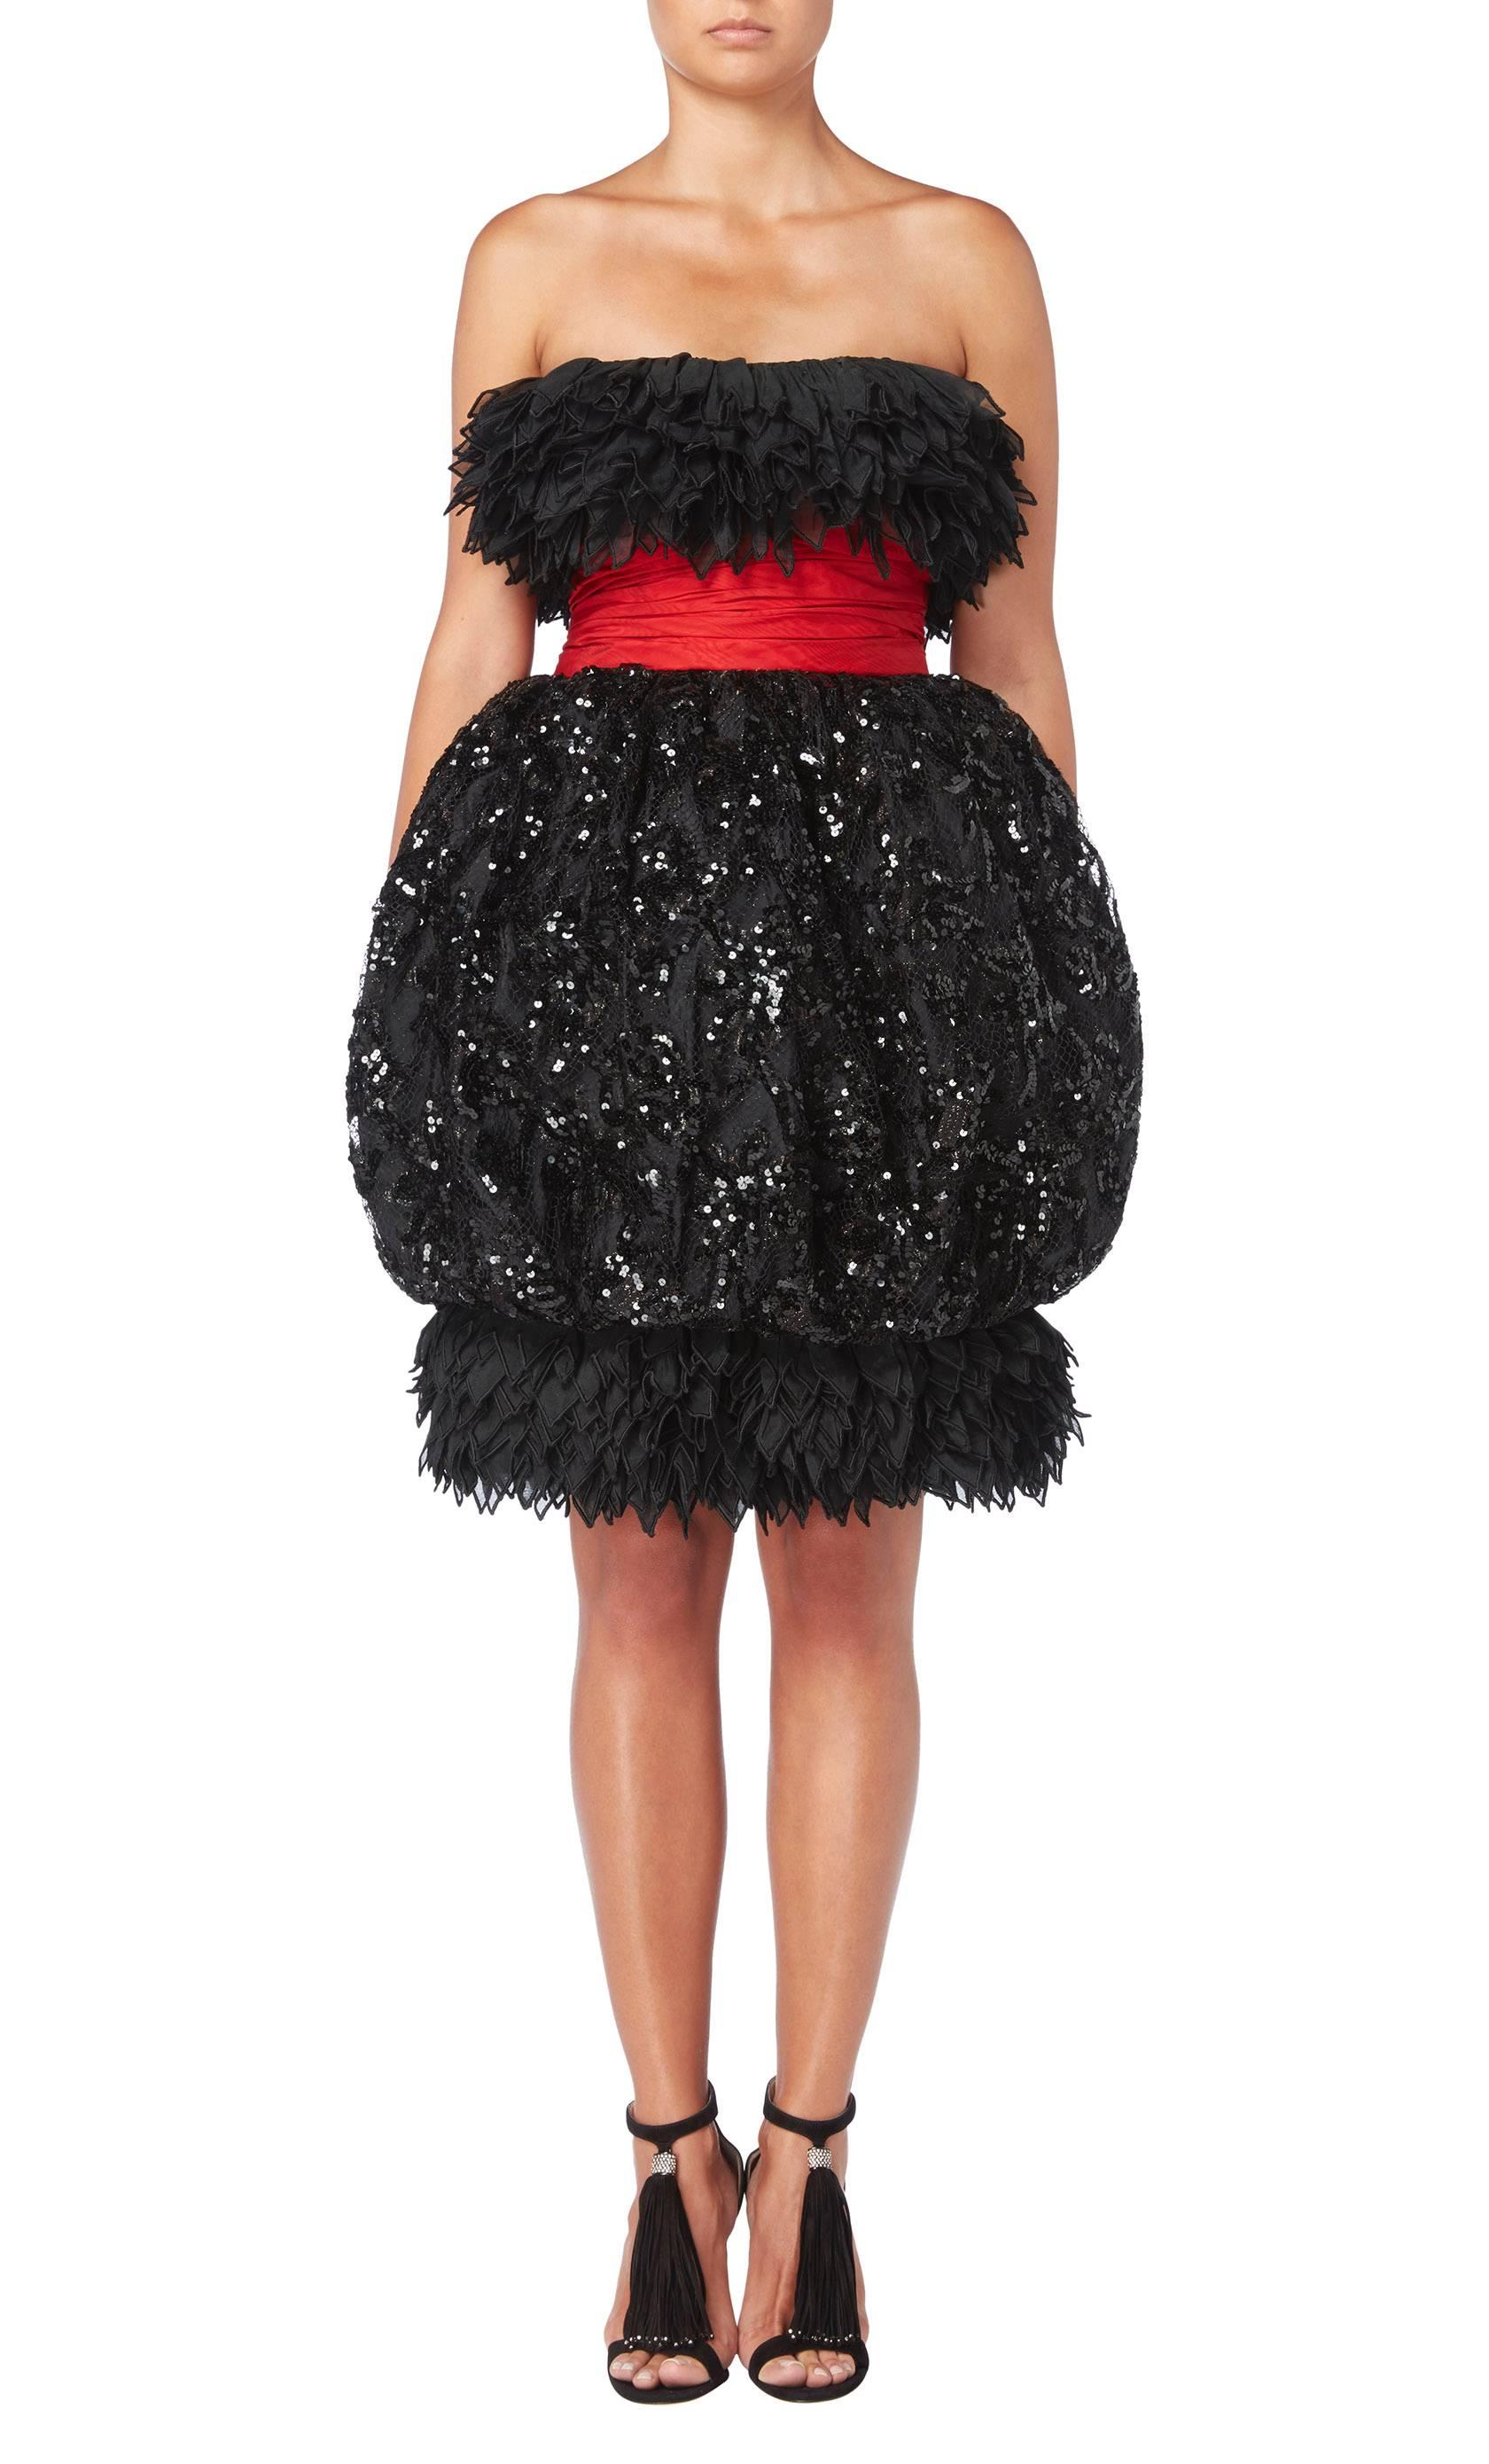 A fabulous example of Christian Lacroix’s designs while head designer at Jean Patou, this haute couture cocktail dress will be sure to make a statement. Constructed in black lace and embellished with thousands of black sequins, the strapless dress